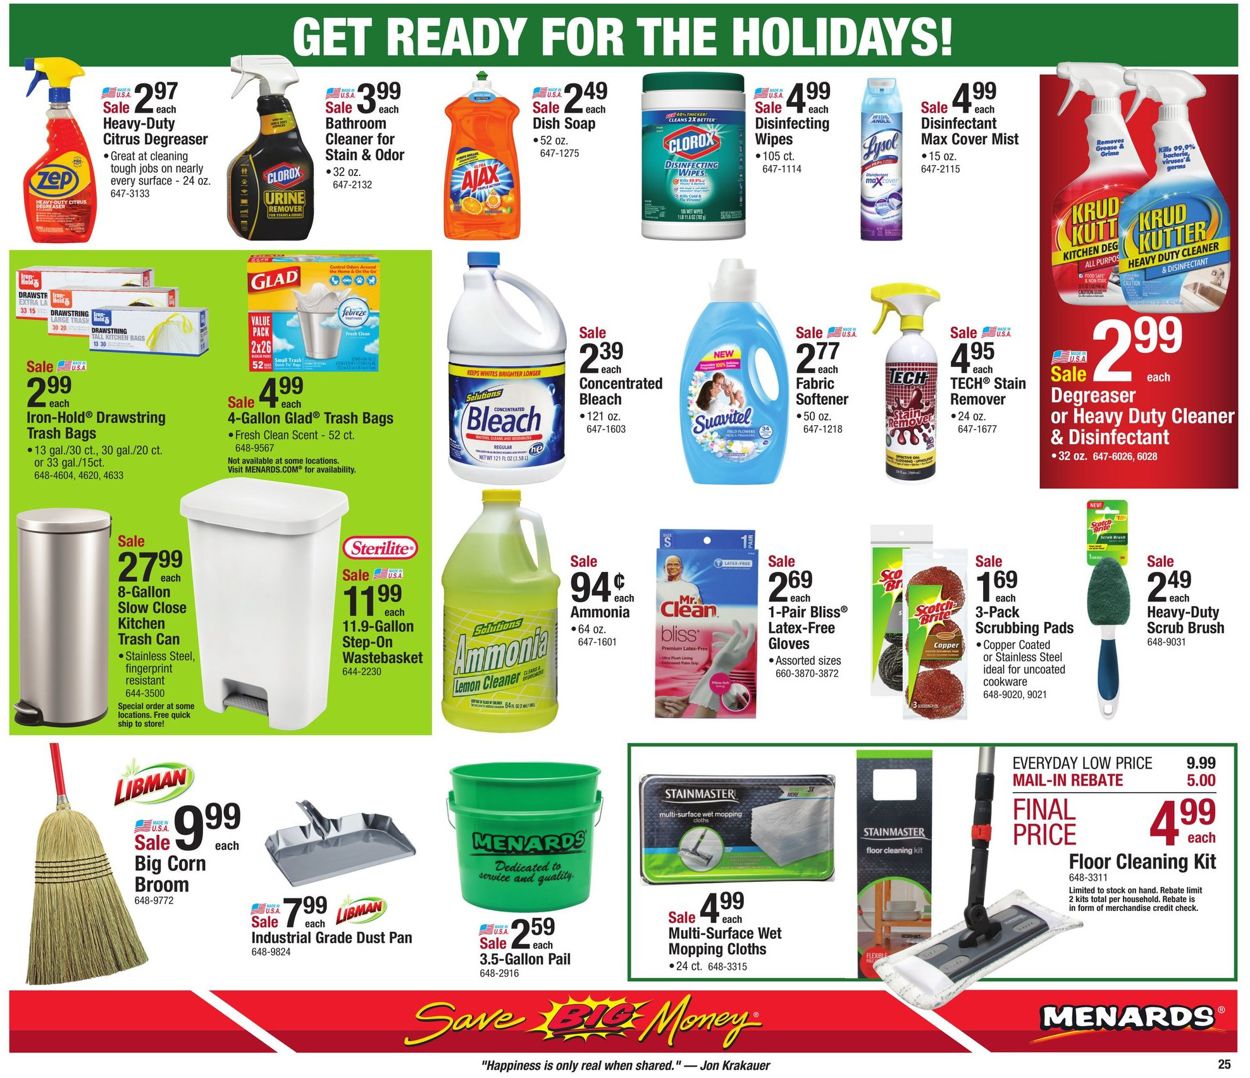 Menards - Christmas Ad 2019 Current weekly ad 12/01 - 12/07/2019 [29 ...